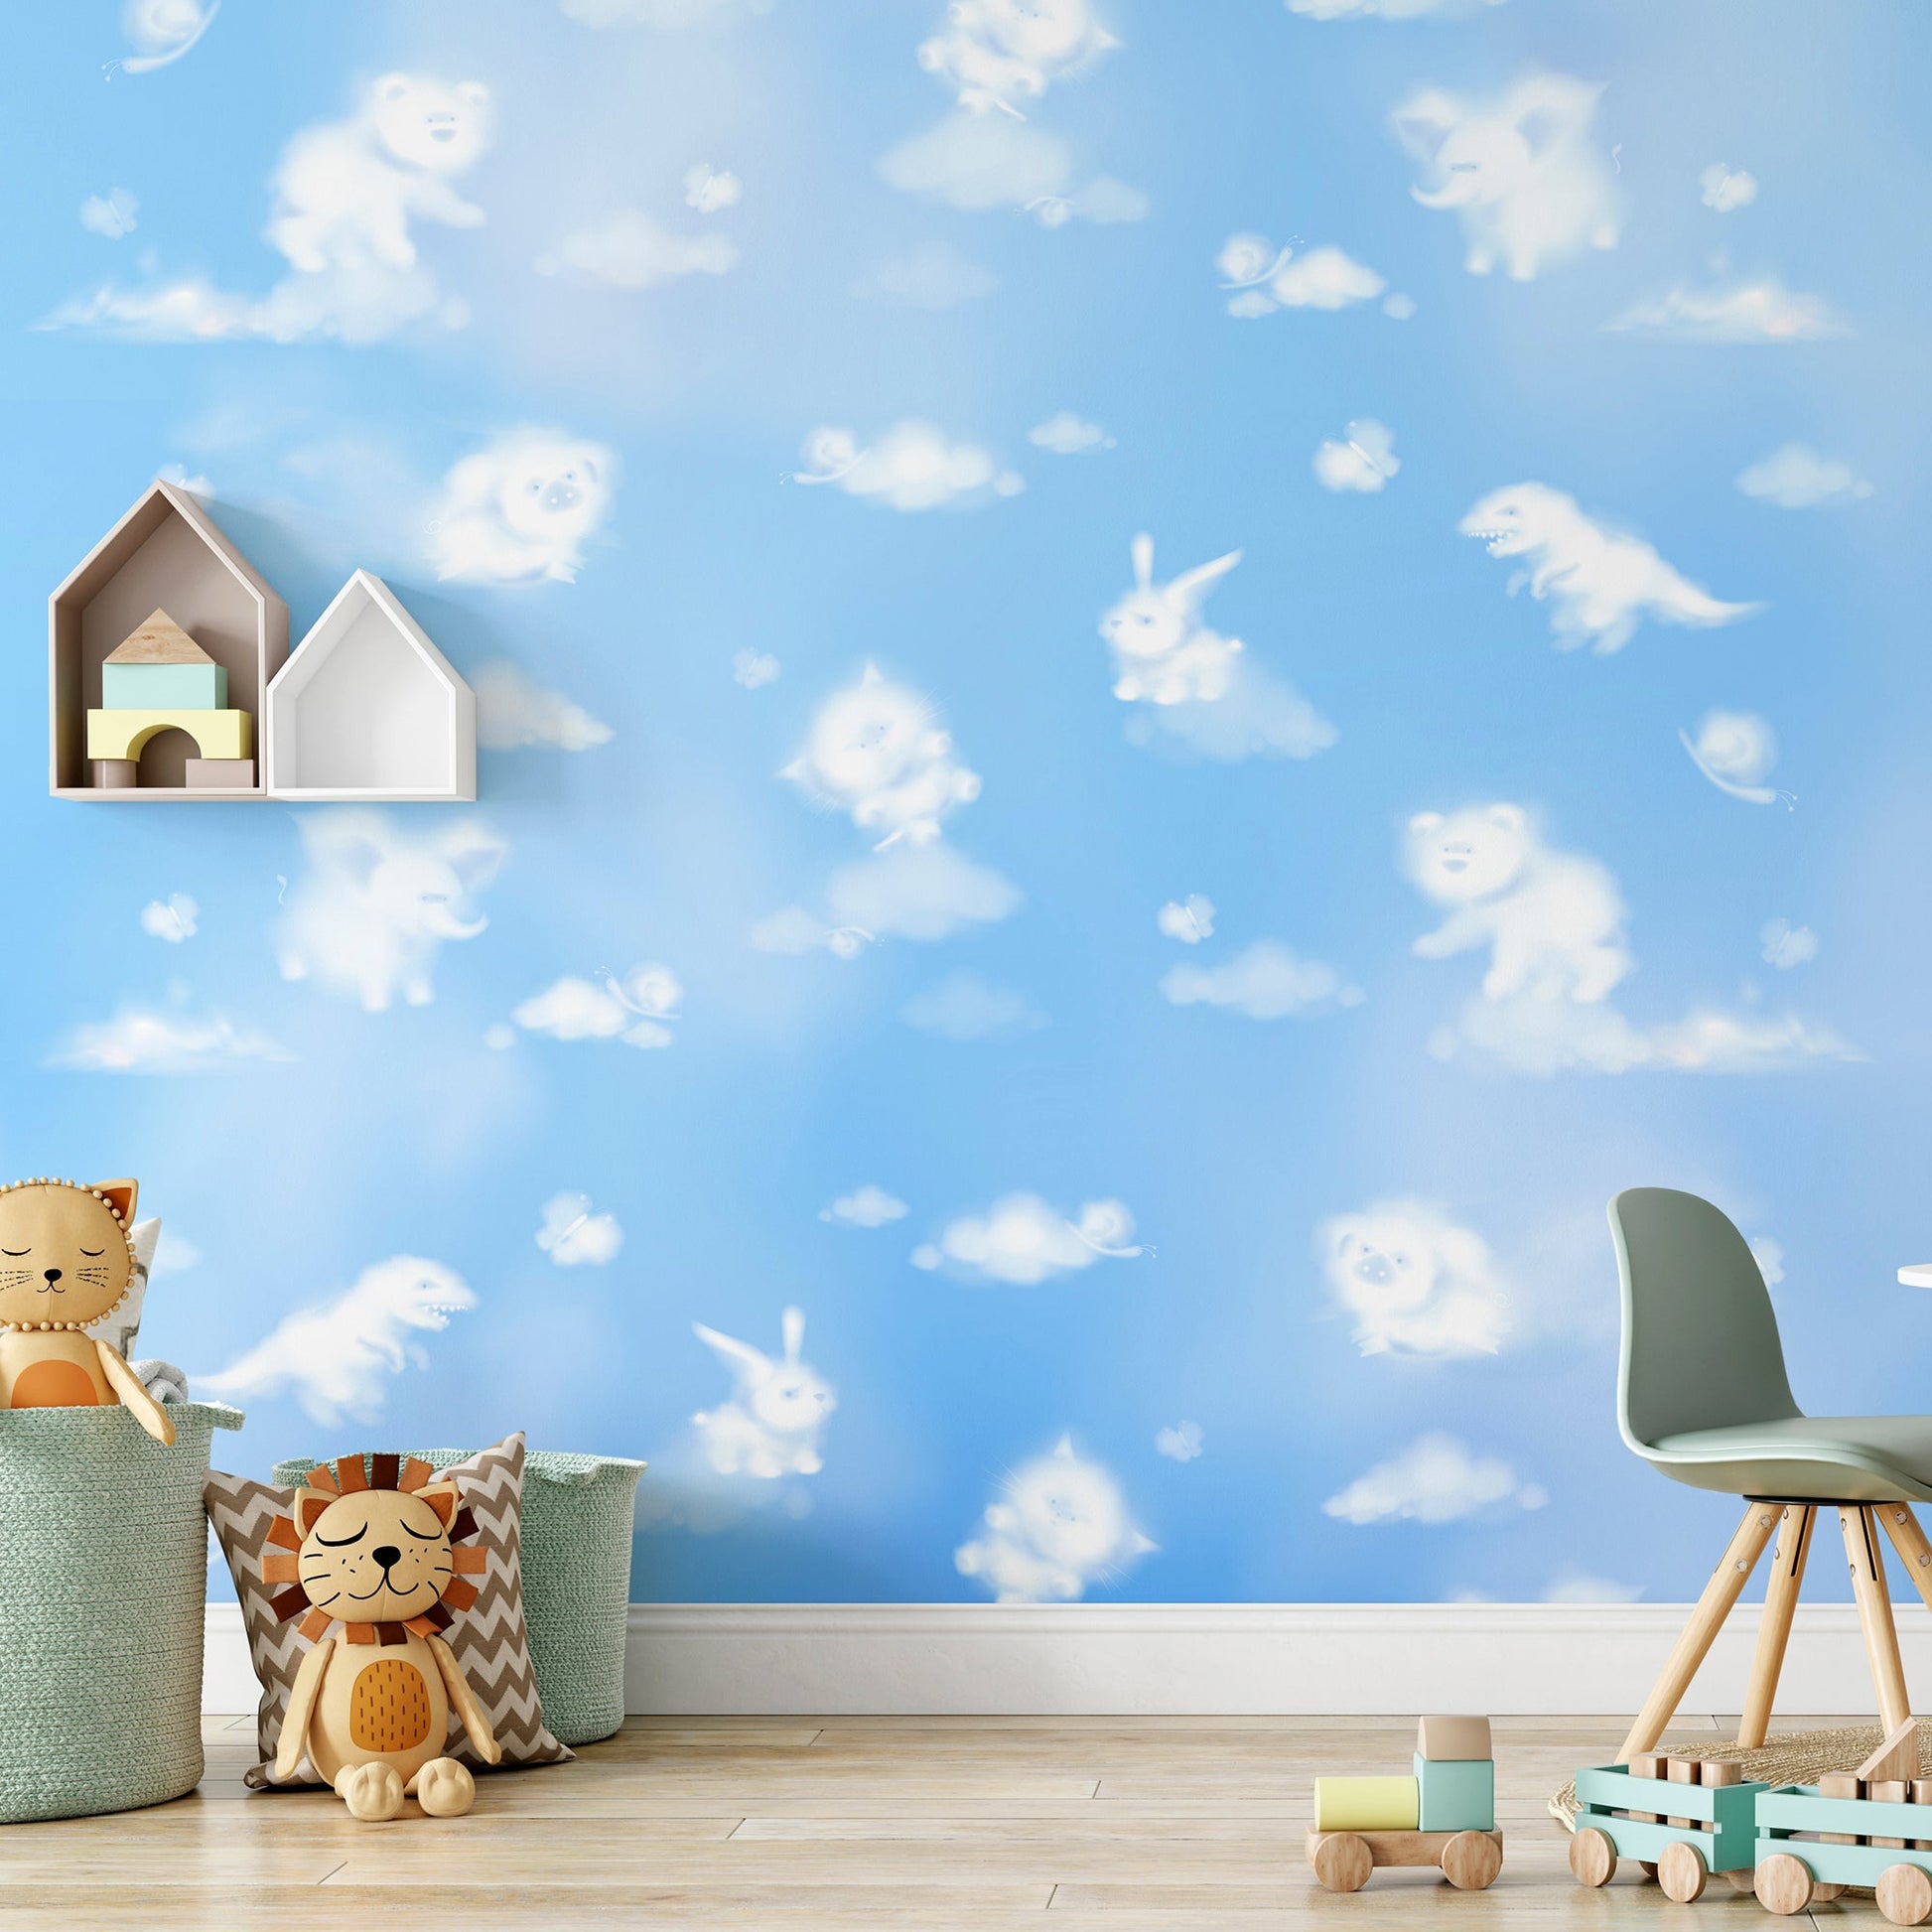 Blue Sky and clouds with animal shapes - OCP TINY THINGS